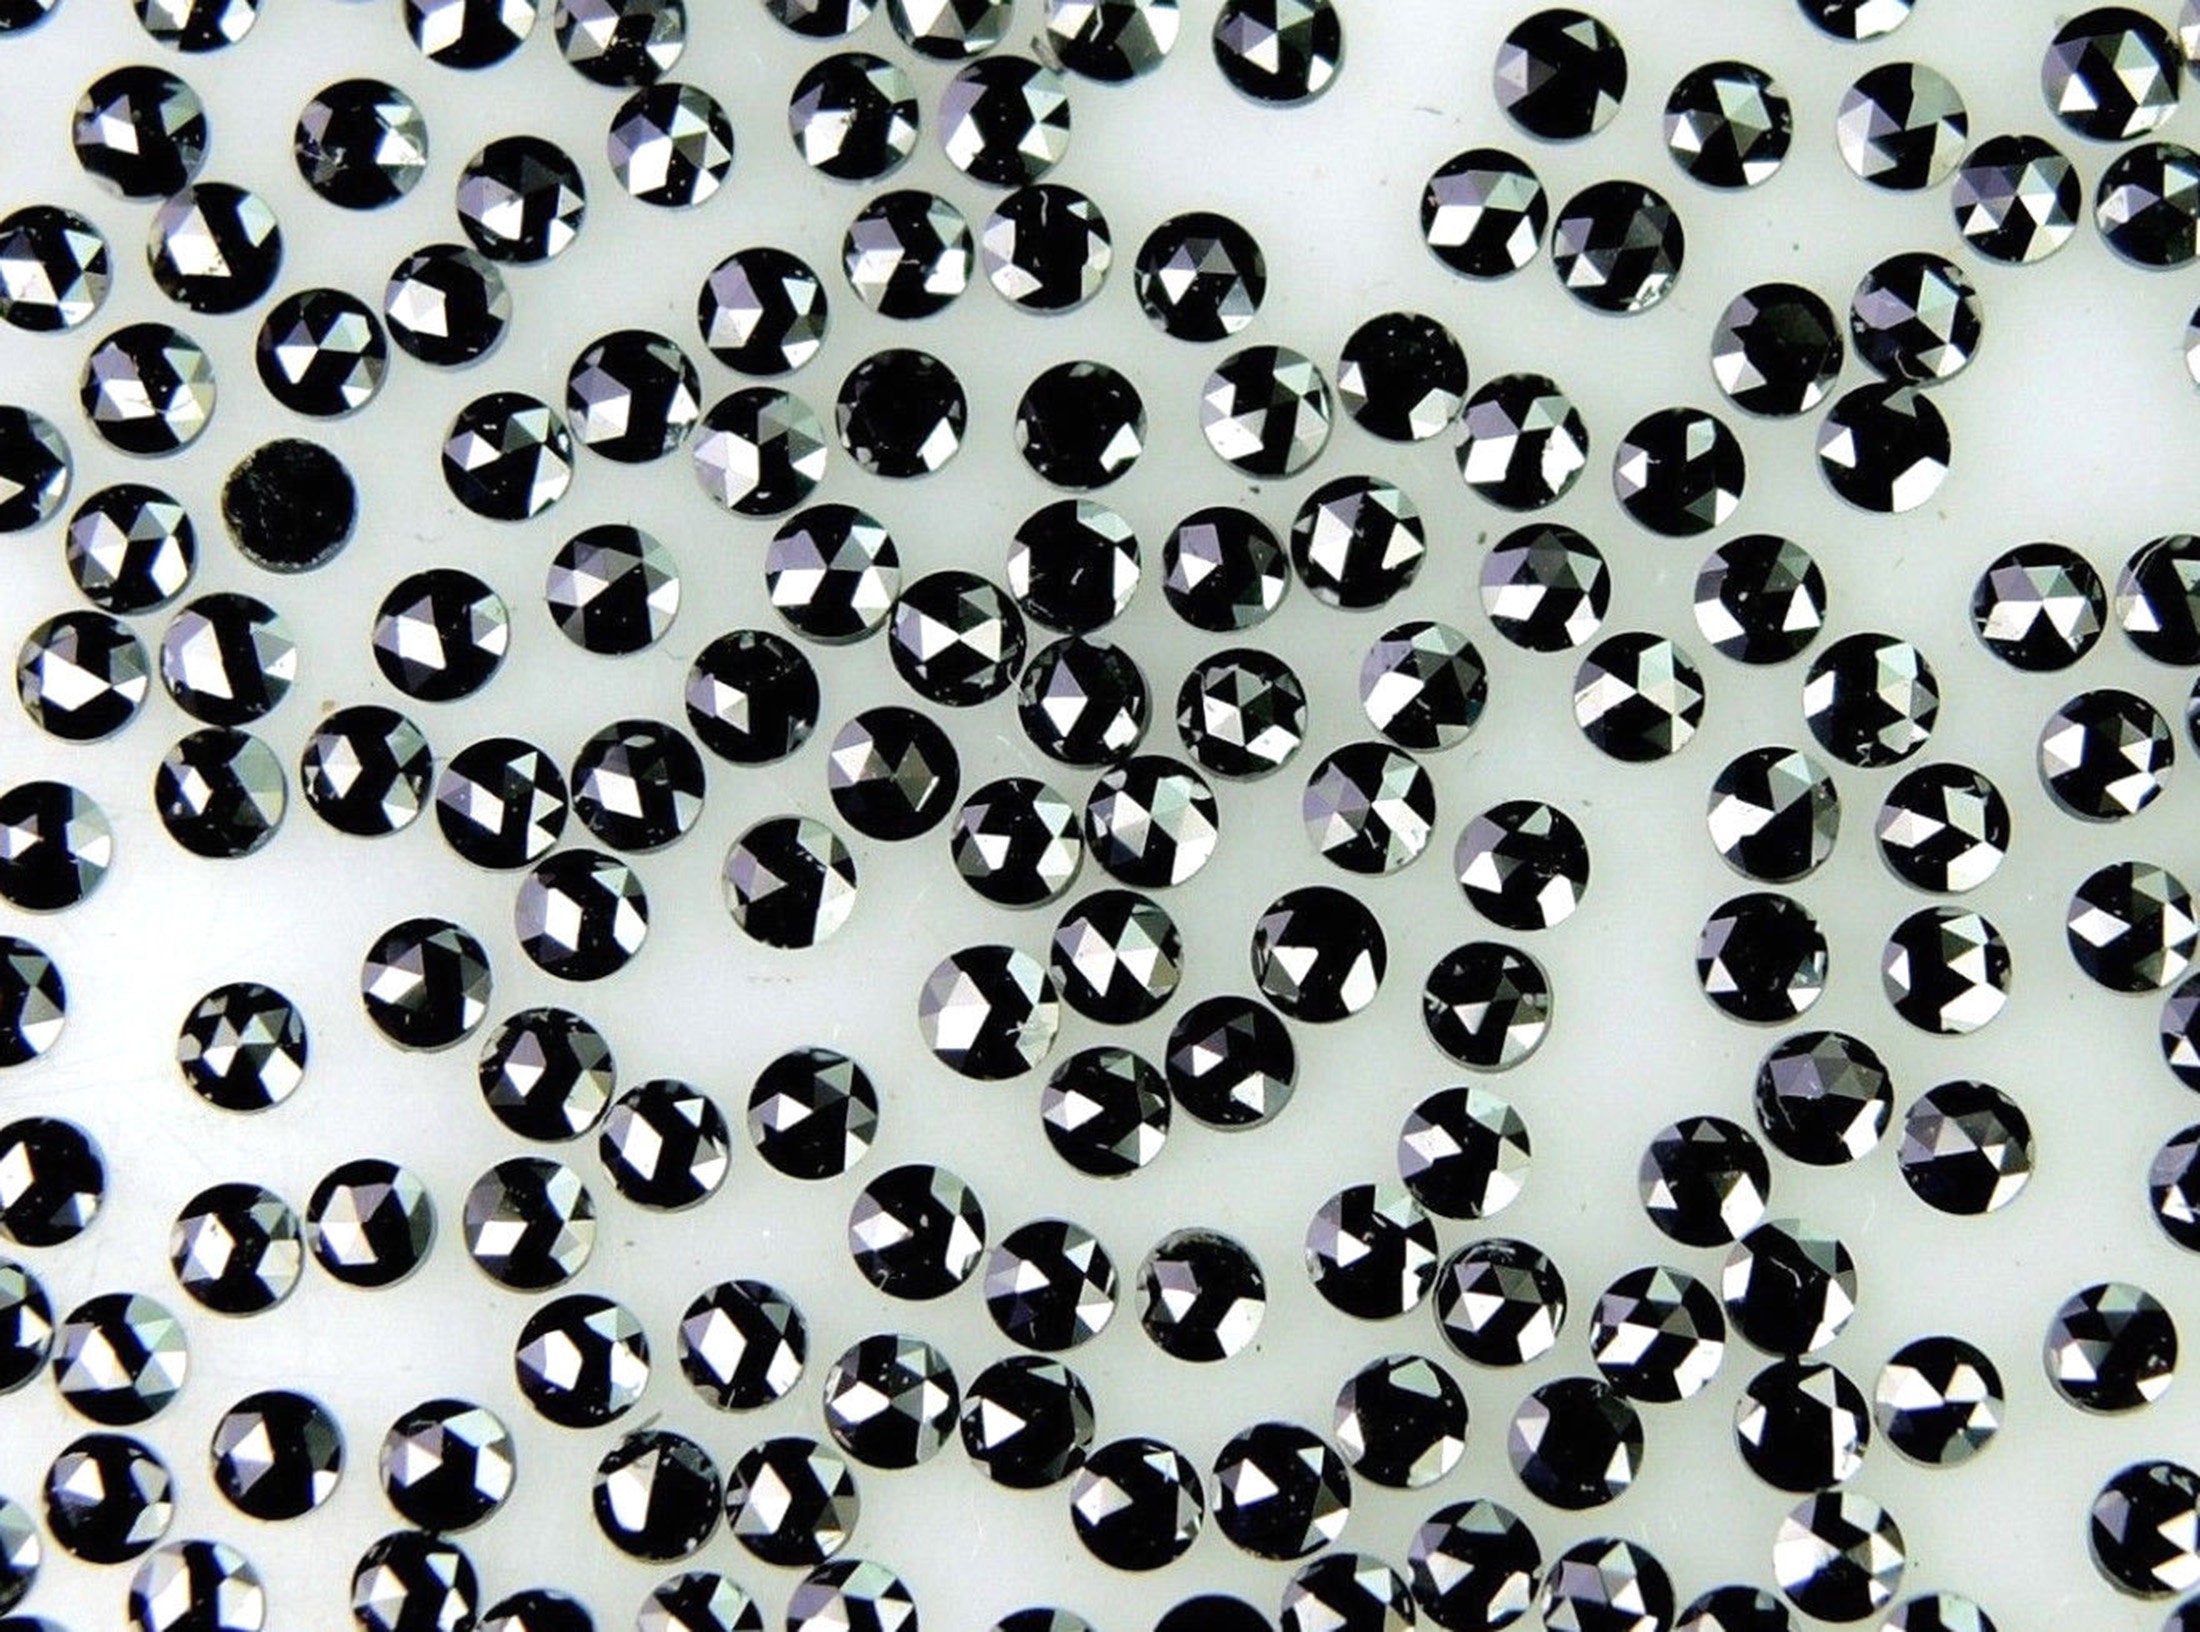 Natural Loose Diamond Black Round Rose Cut 1st Quality Pick Any Size Q107